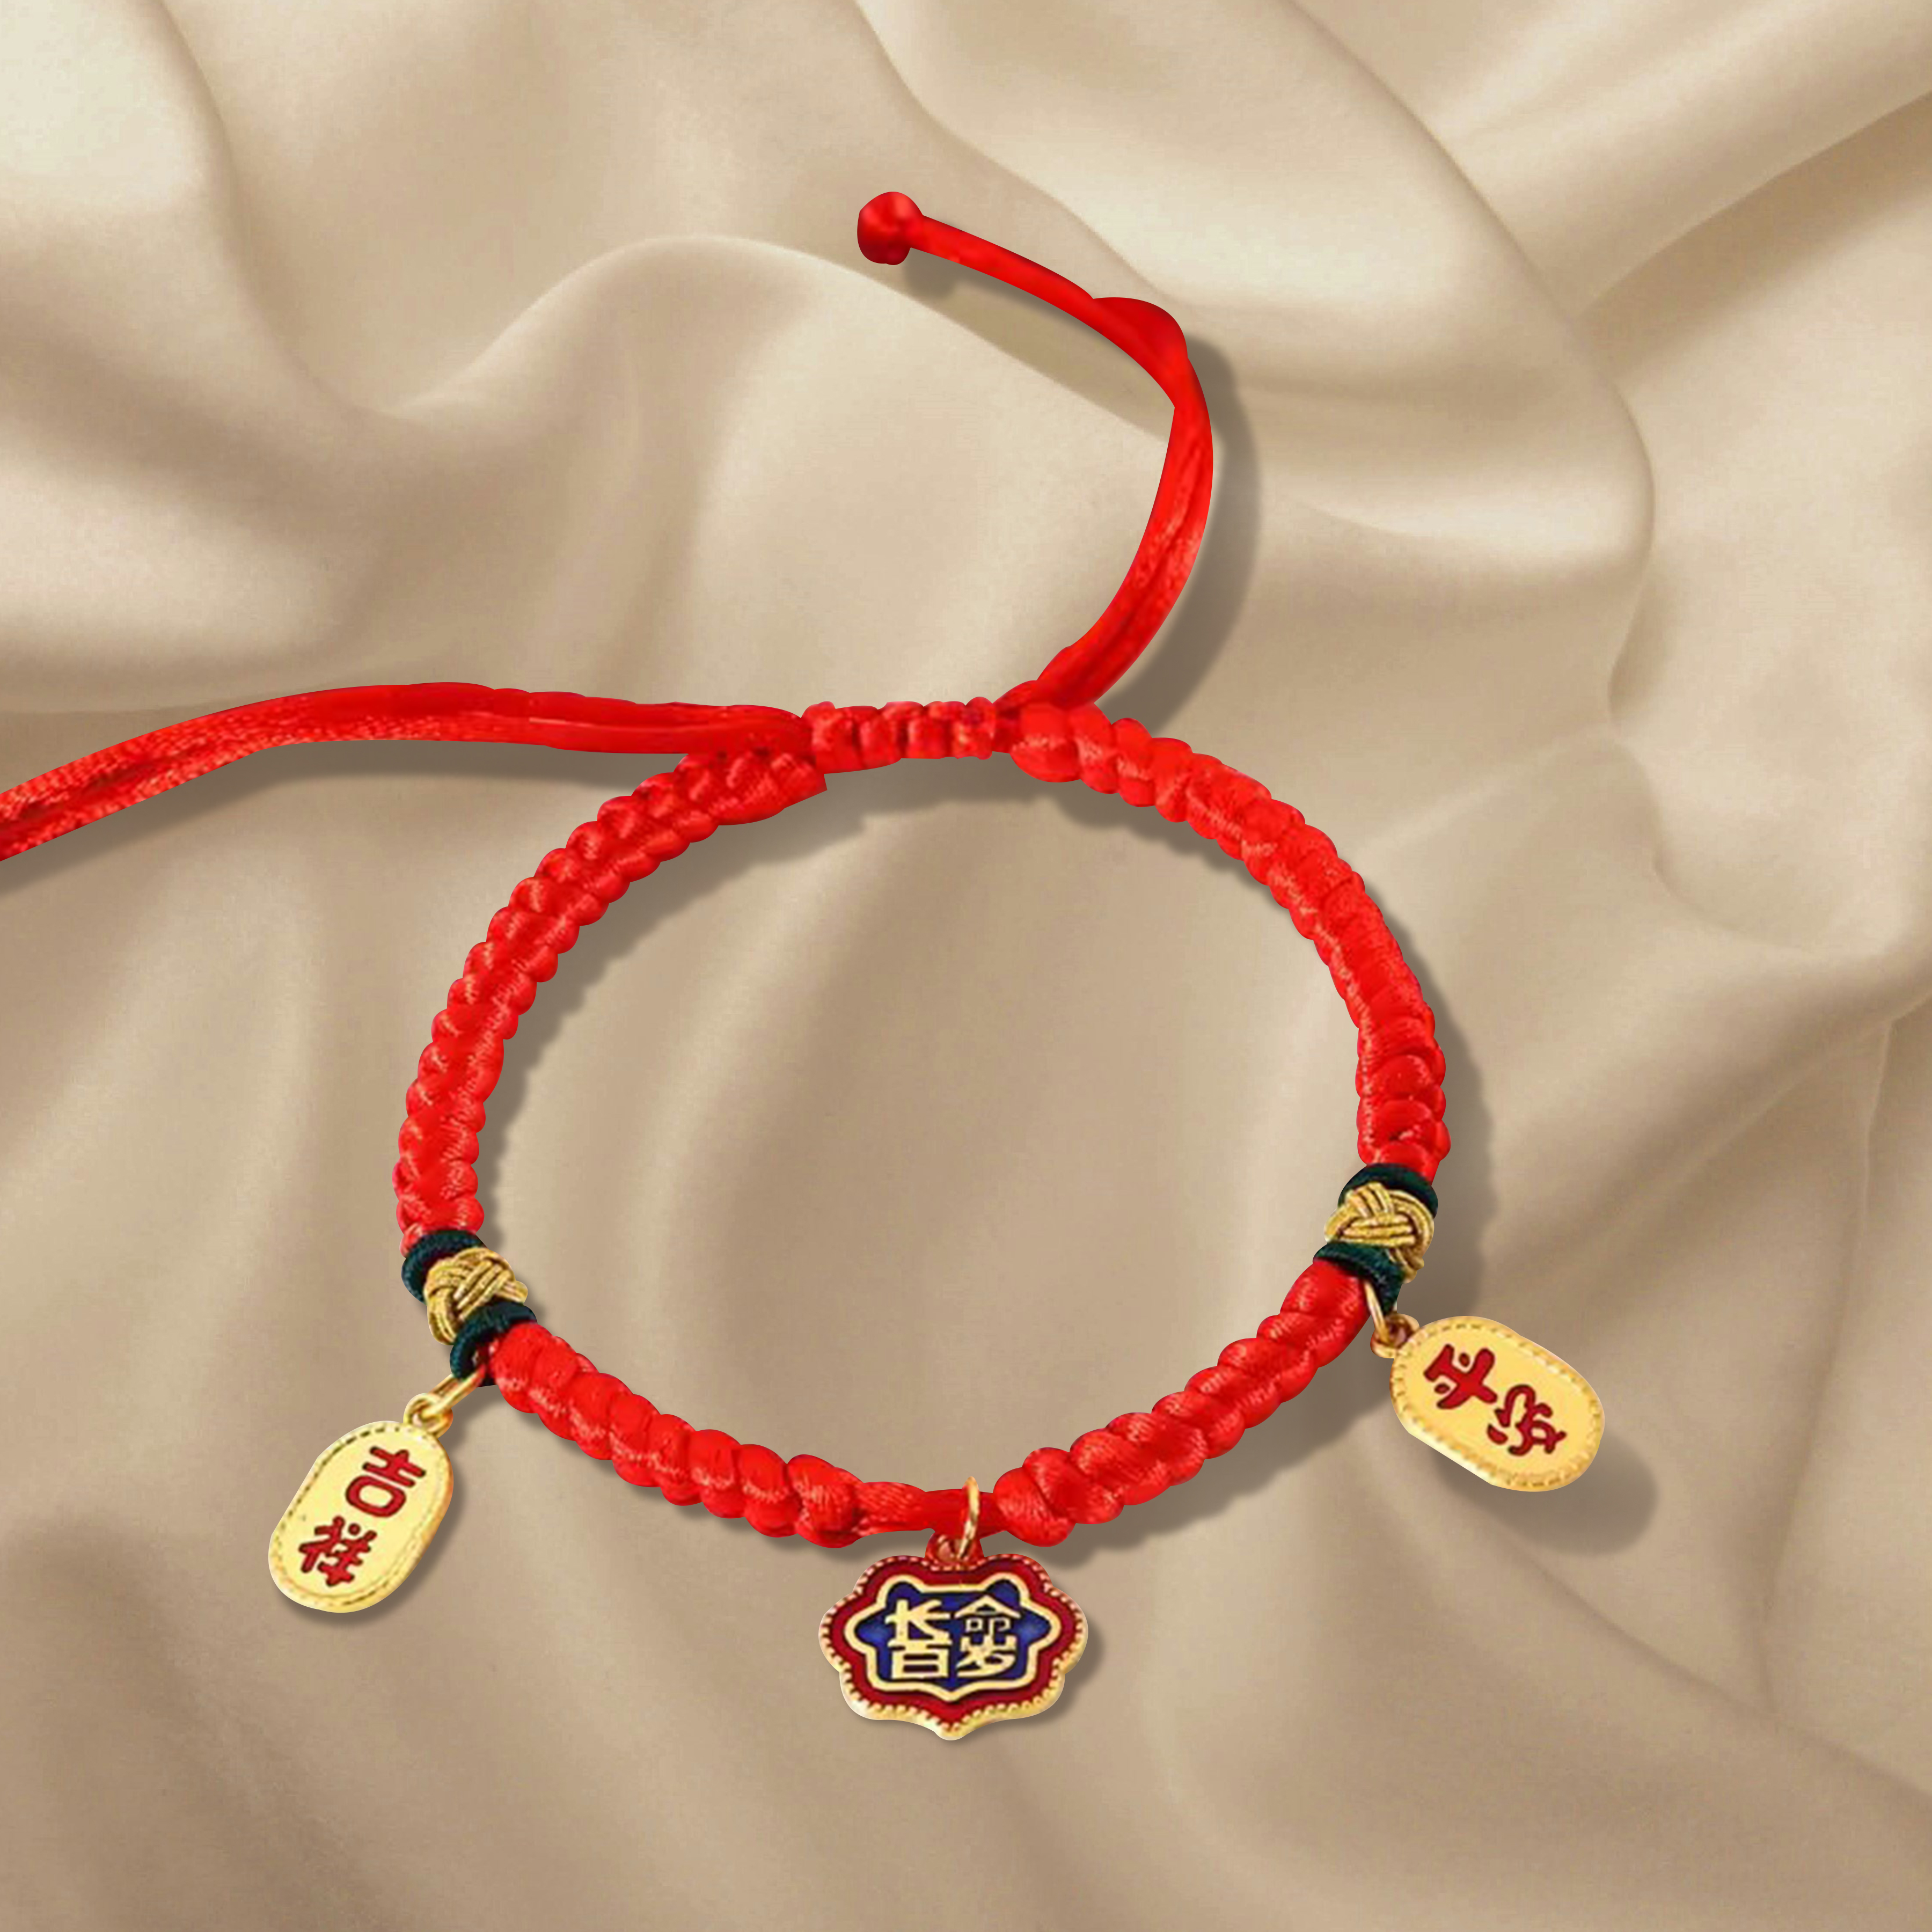 Lucklumen Cat Red Rope Pet Good Luck Adjustable Collar Attracts Good Luck And Blesses Peace